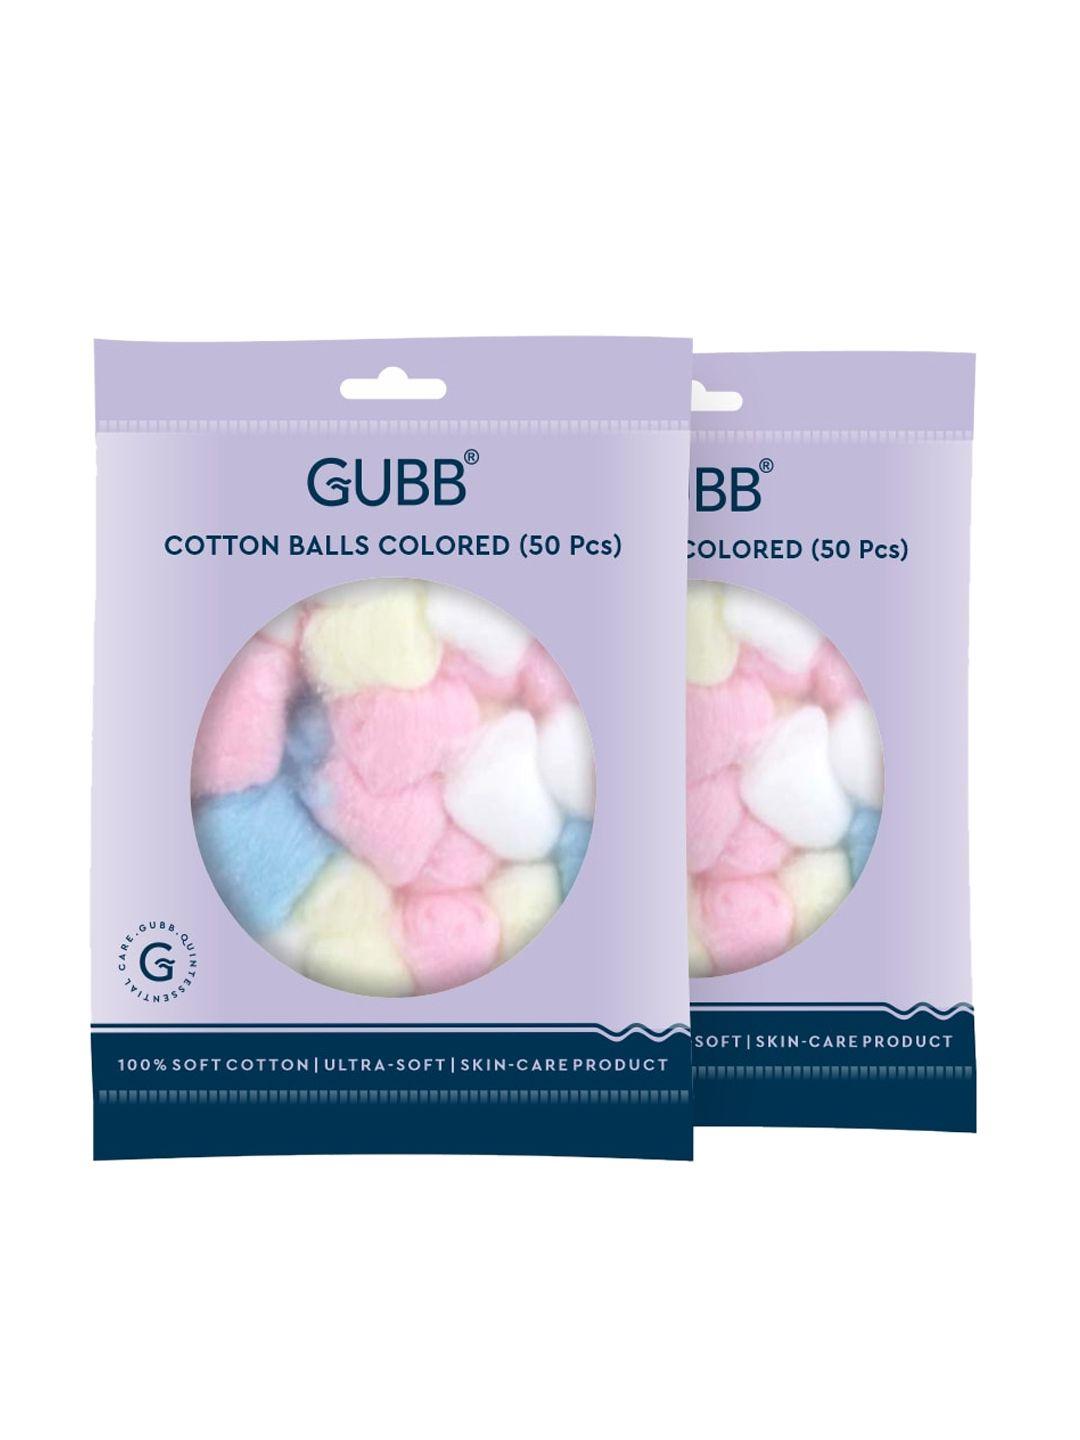 gubb-set-of-2-facial-cotton-balls-for-face-&-eyes-makeup-remover-cleanser-wipes